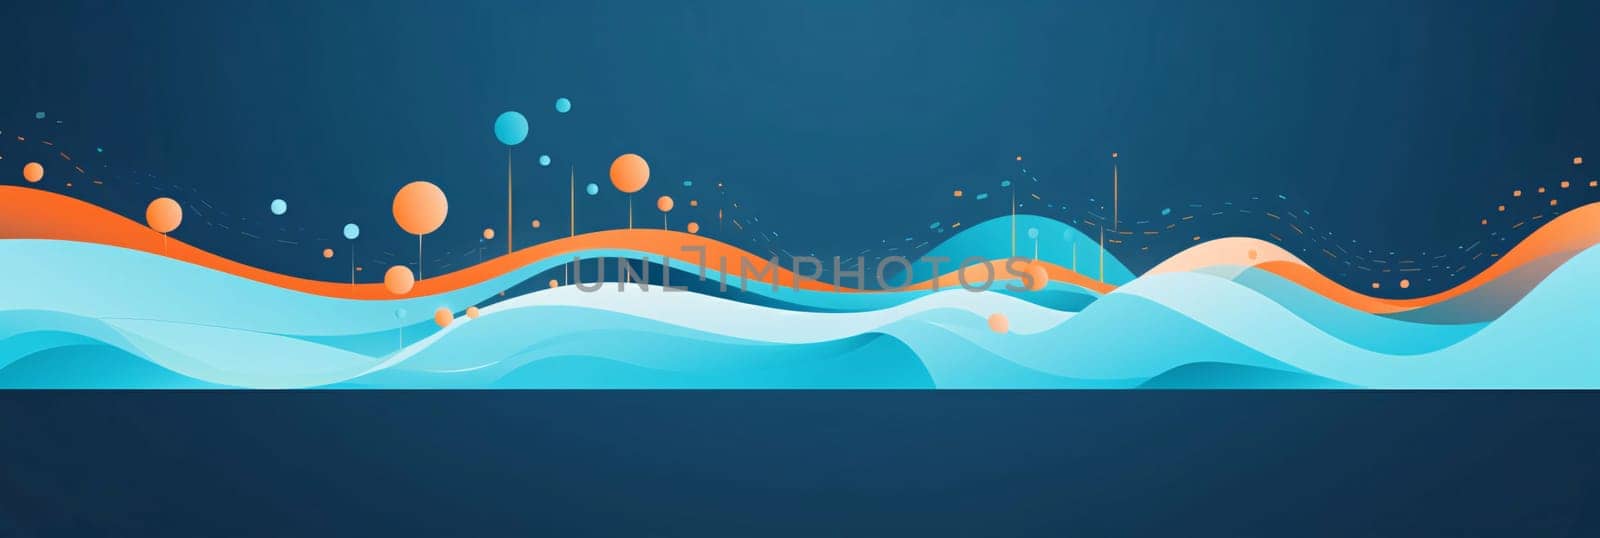 Abstract blue background with waves. Vector illustration. Can be used for wallpaper, web page background, web banners. by ThemesS